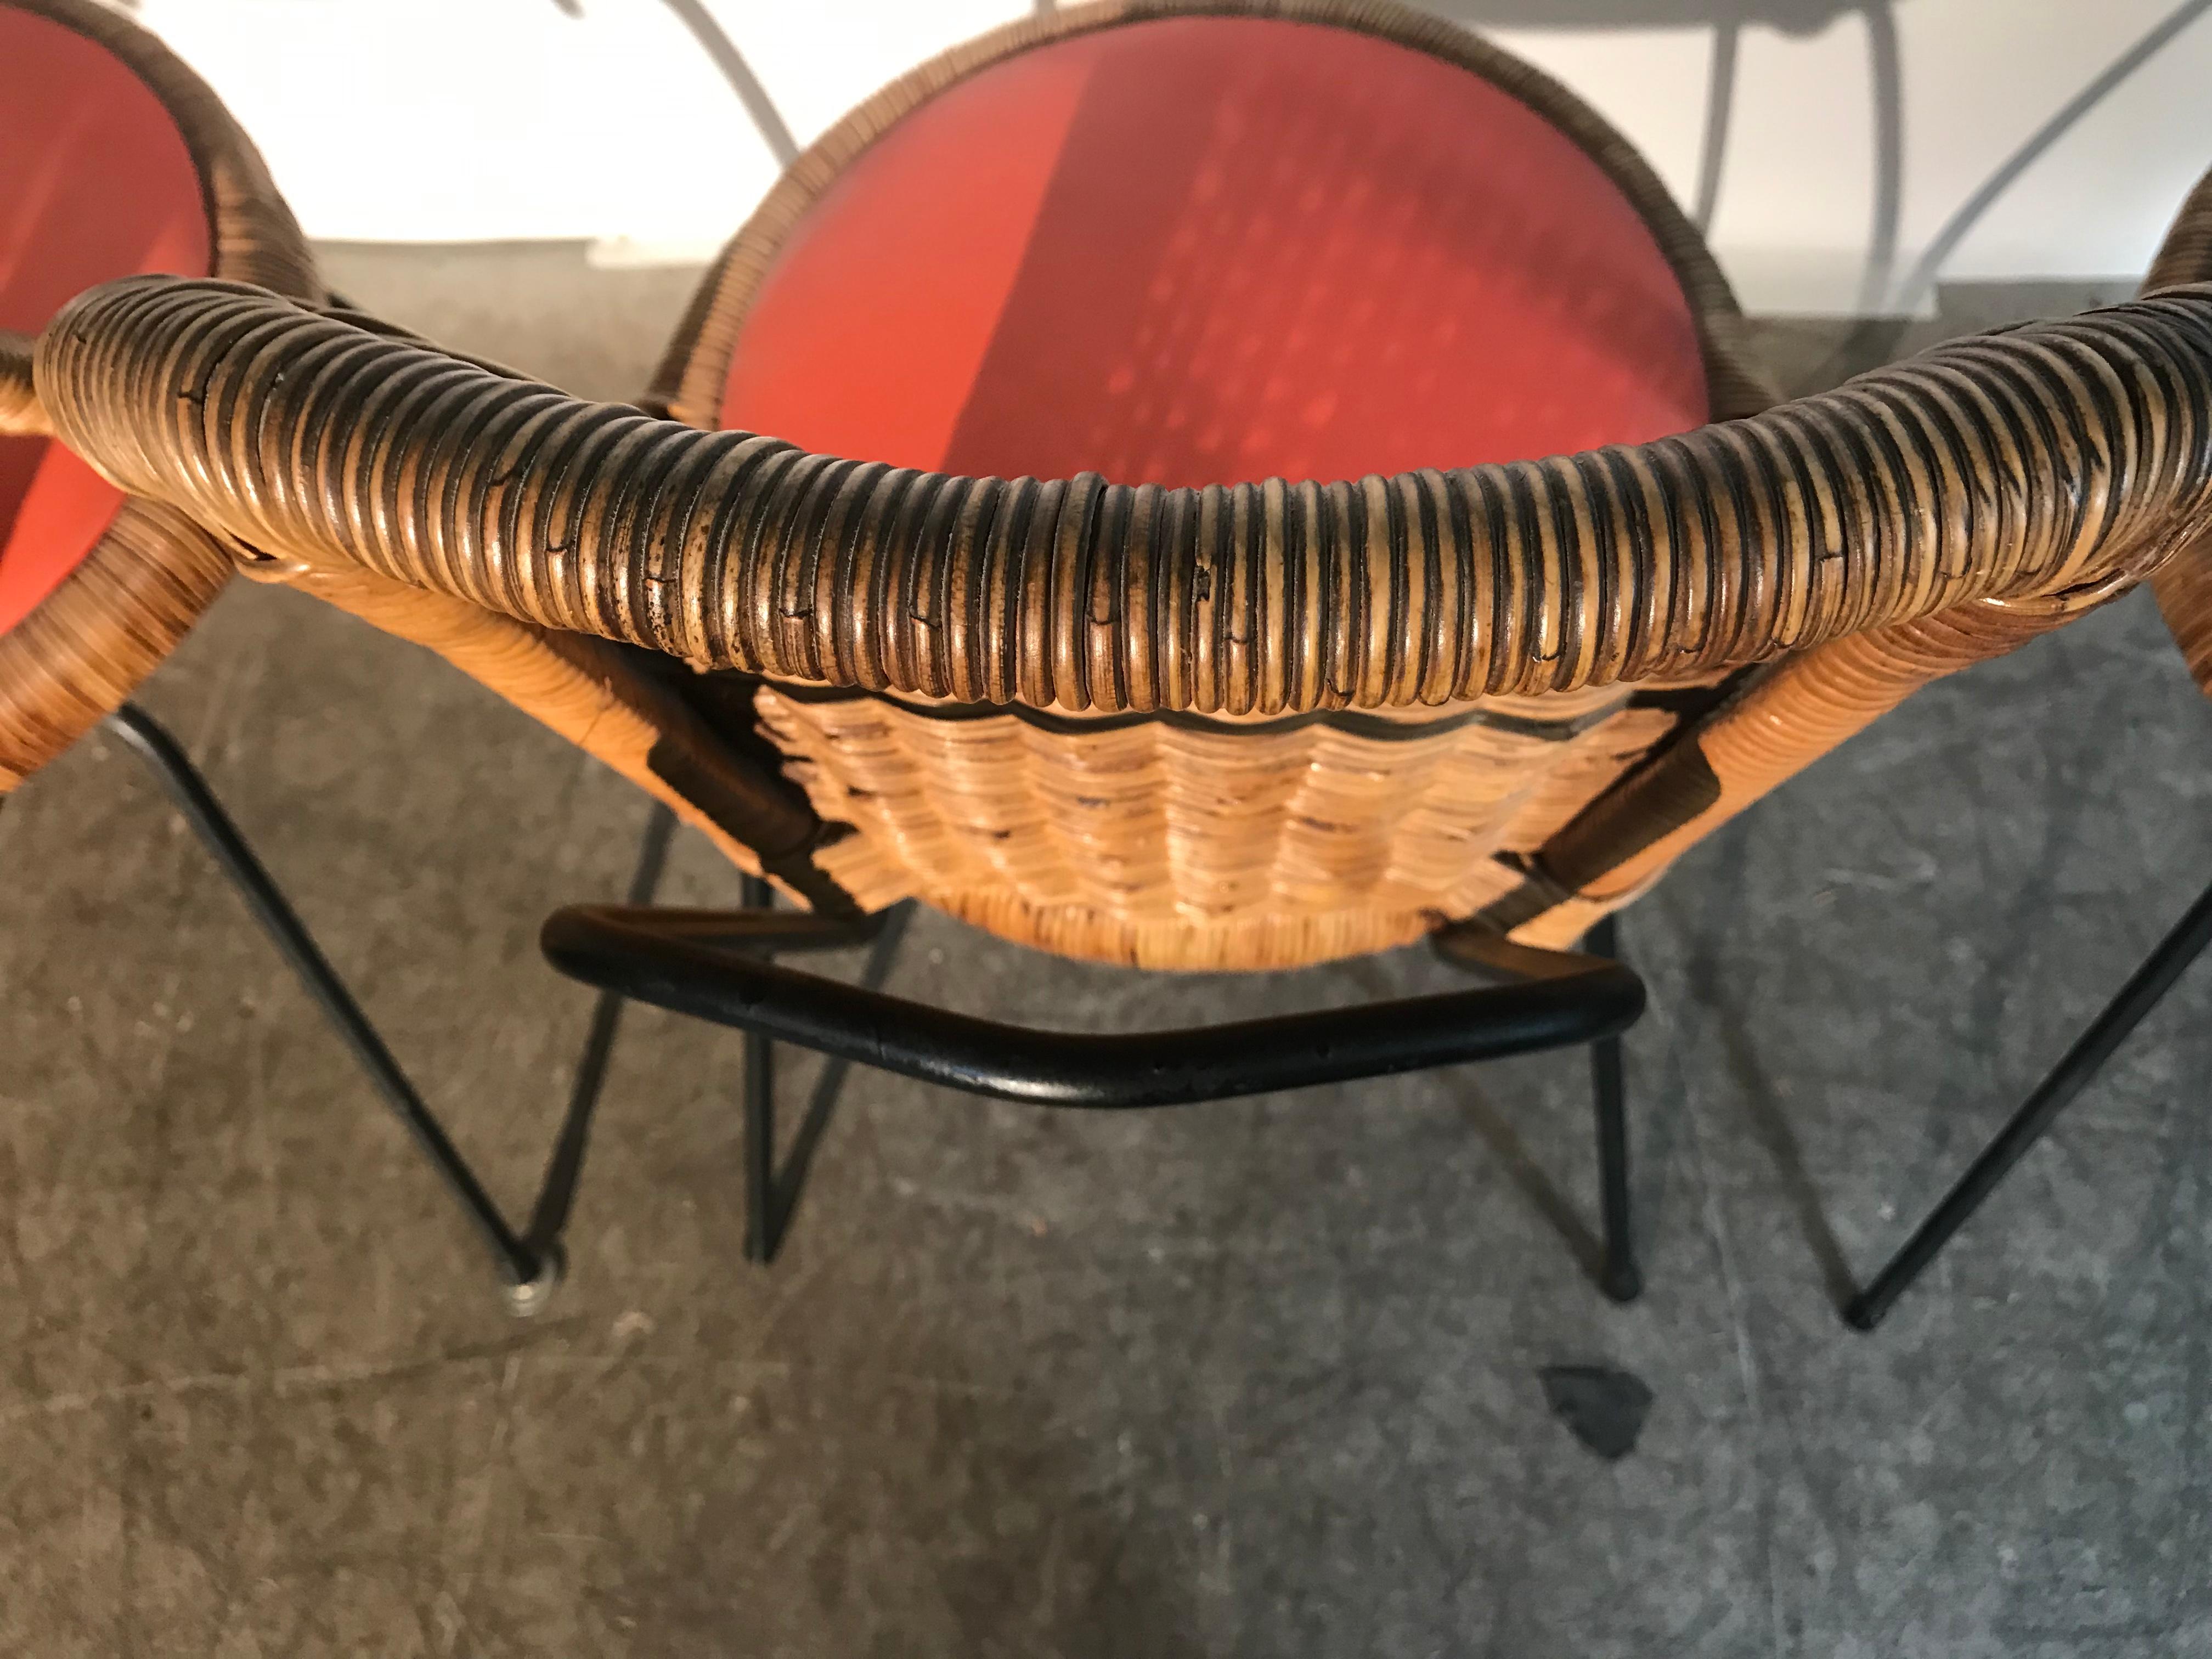 Mid-Century Modern Danny Ho Fong, Wicker and Iron Dinette Chairs for Tropical